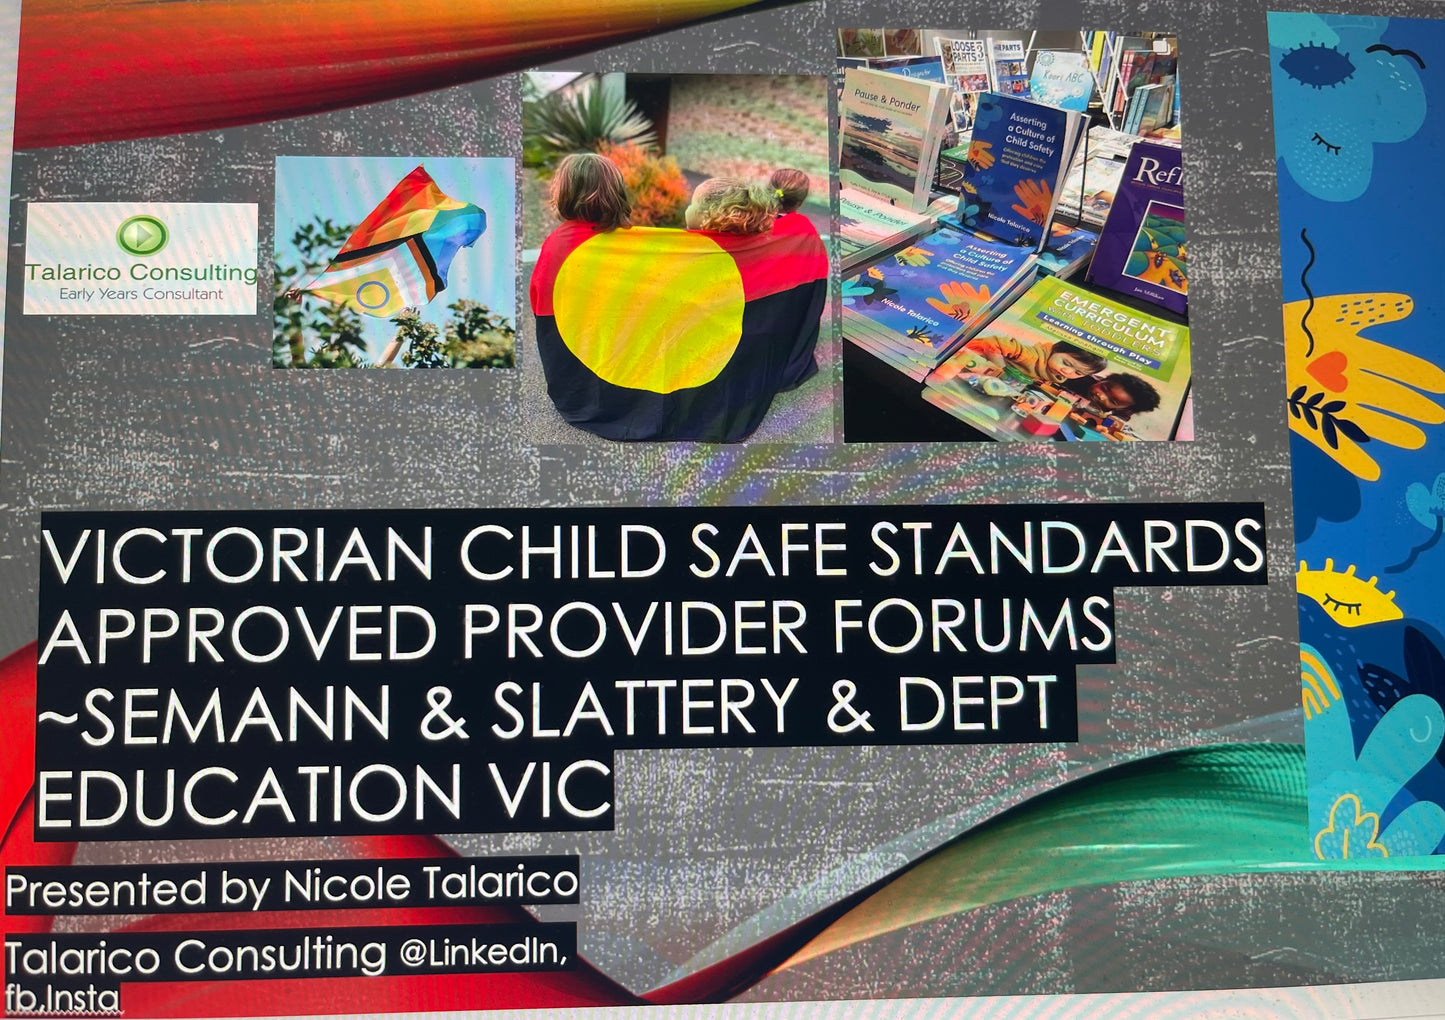 ASSERTING A CULTURE OF CHILD SAFETY OFFERING CHILDREN THE PROTECTION AND CARE THAT THEY DESERVE